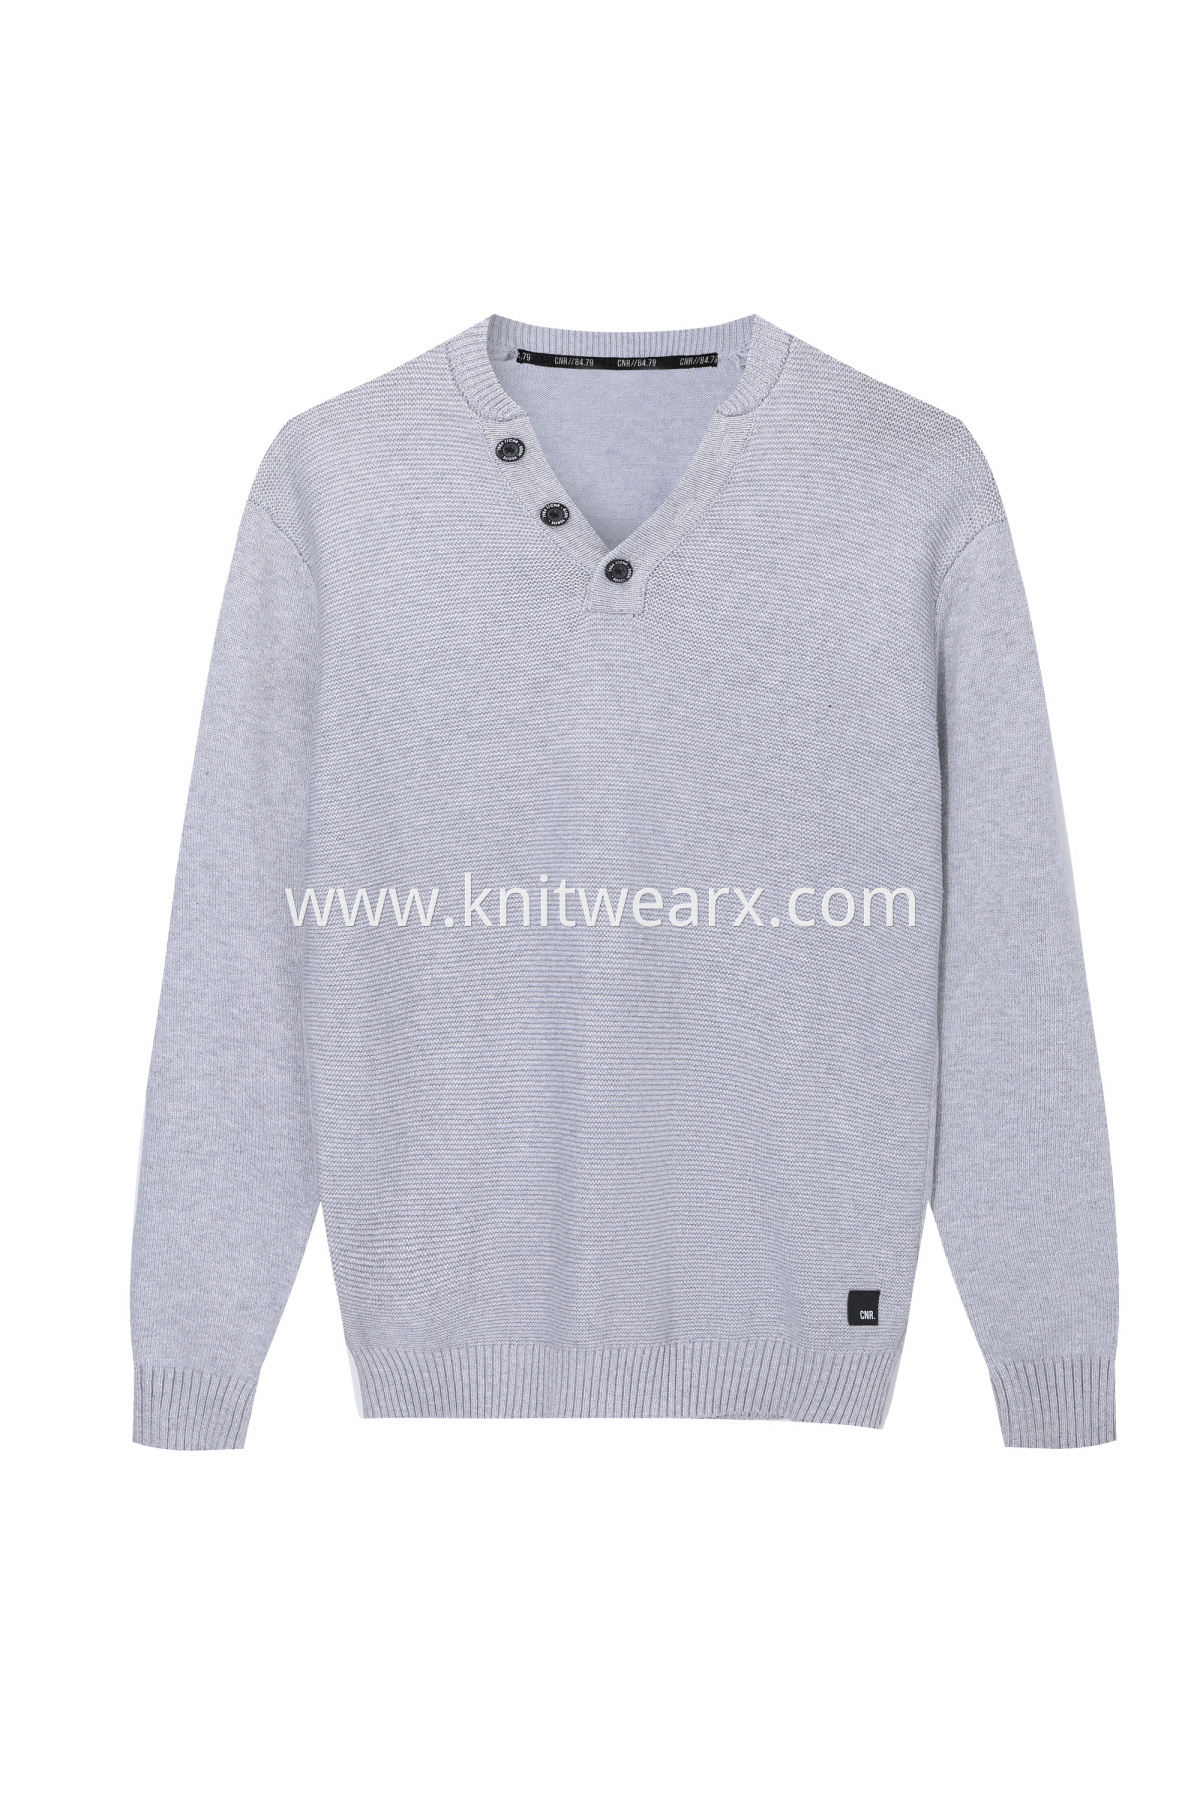 Men's Knitted Henley button neck Sweater